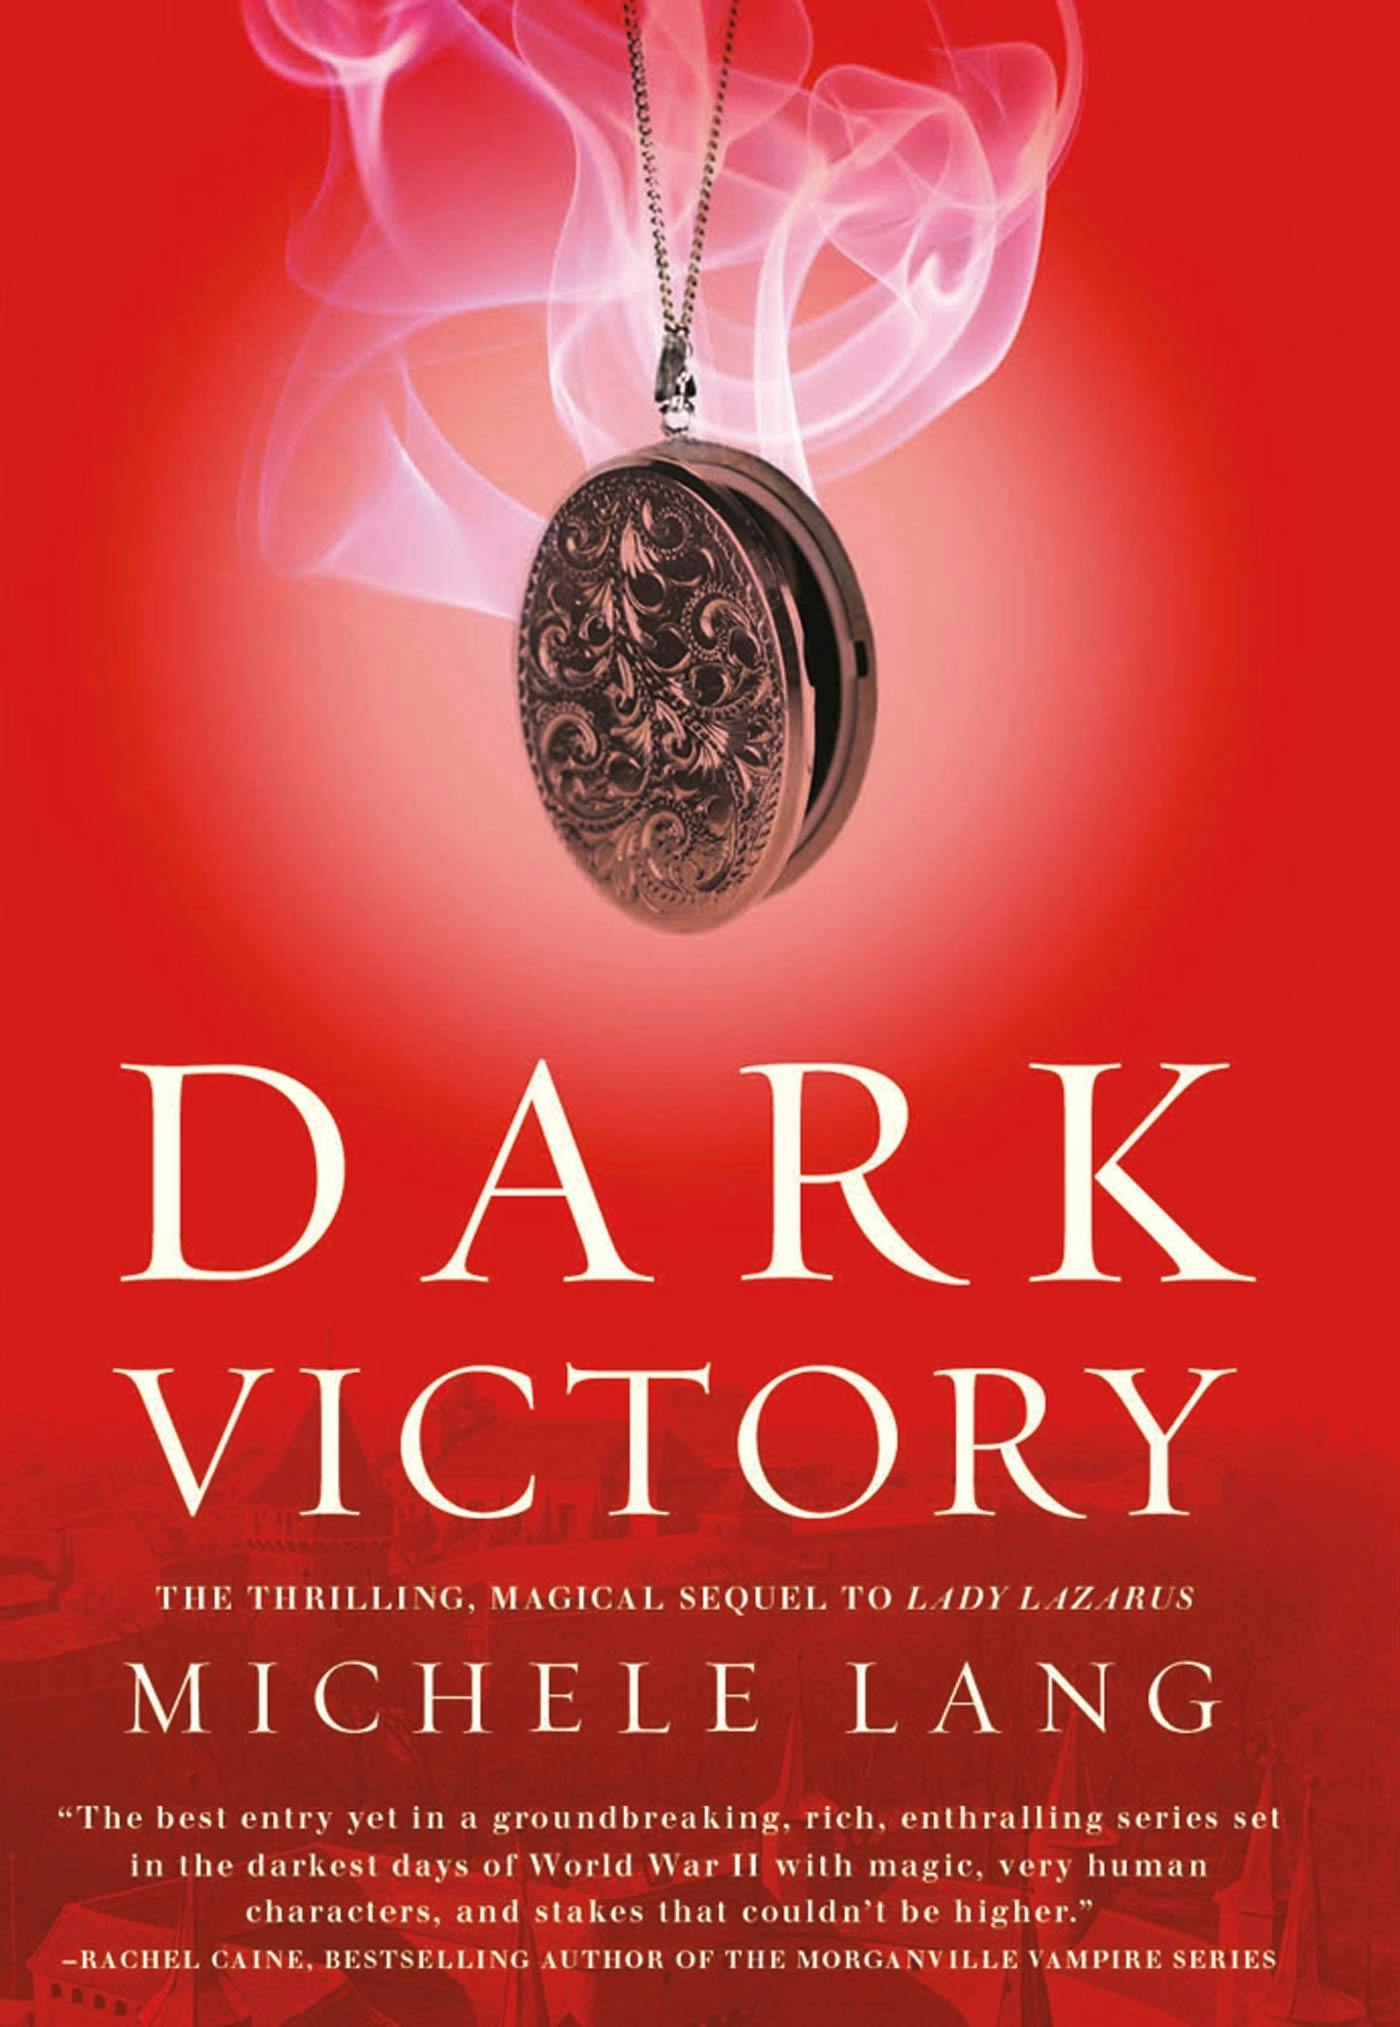 Cover for the book titled as: Dark Victory